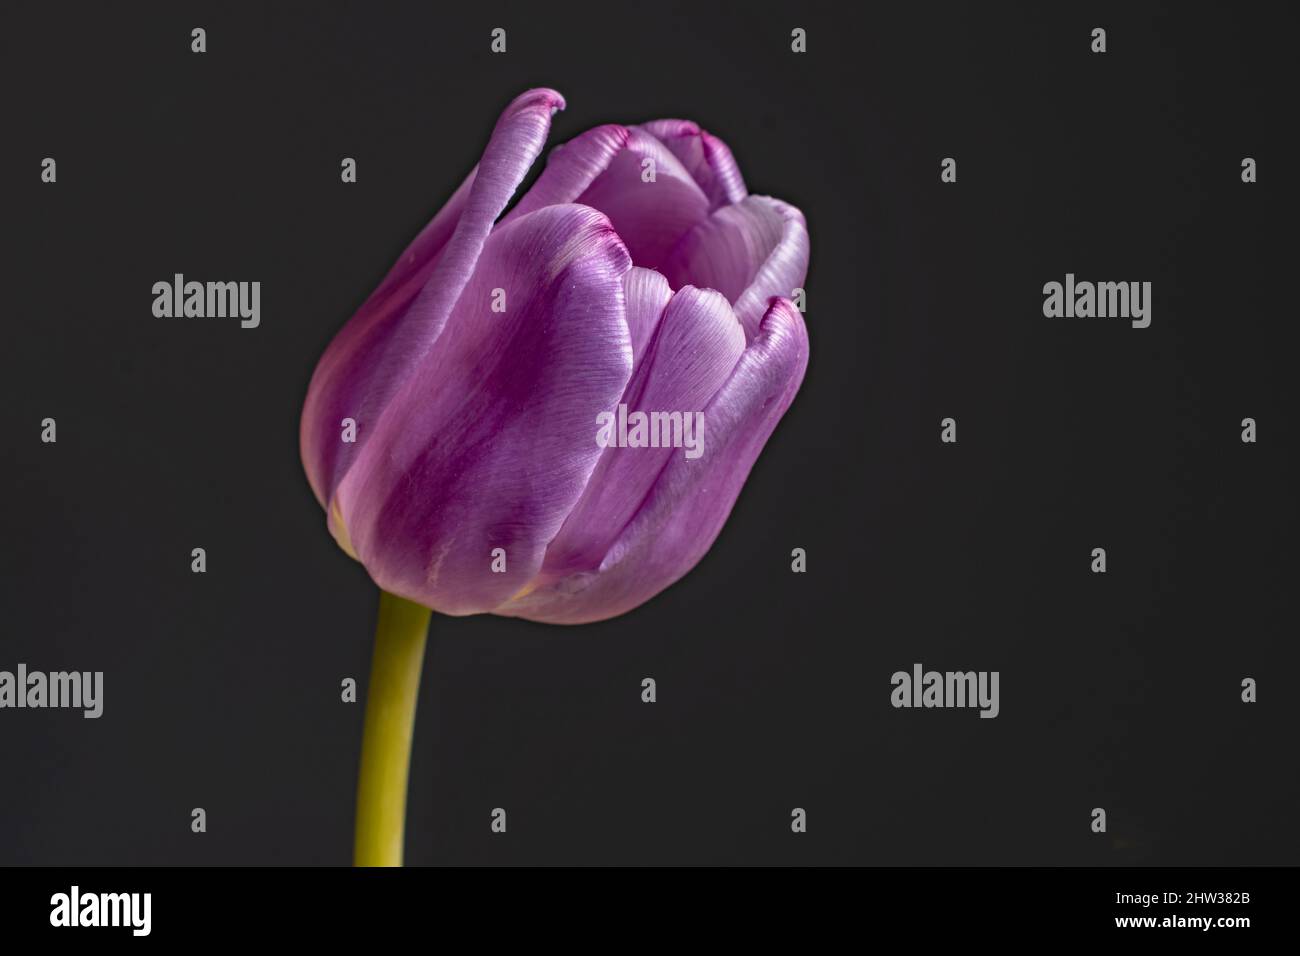 A  lovely side on close up view of a single purple tulip  on a black background Stock Photo